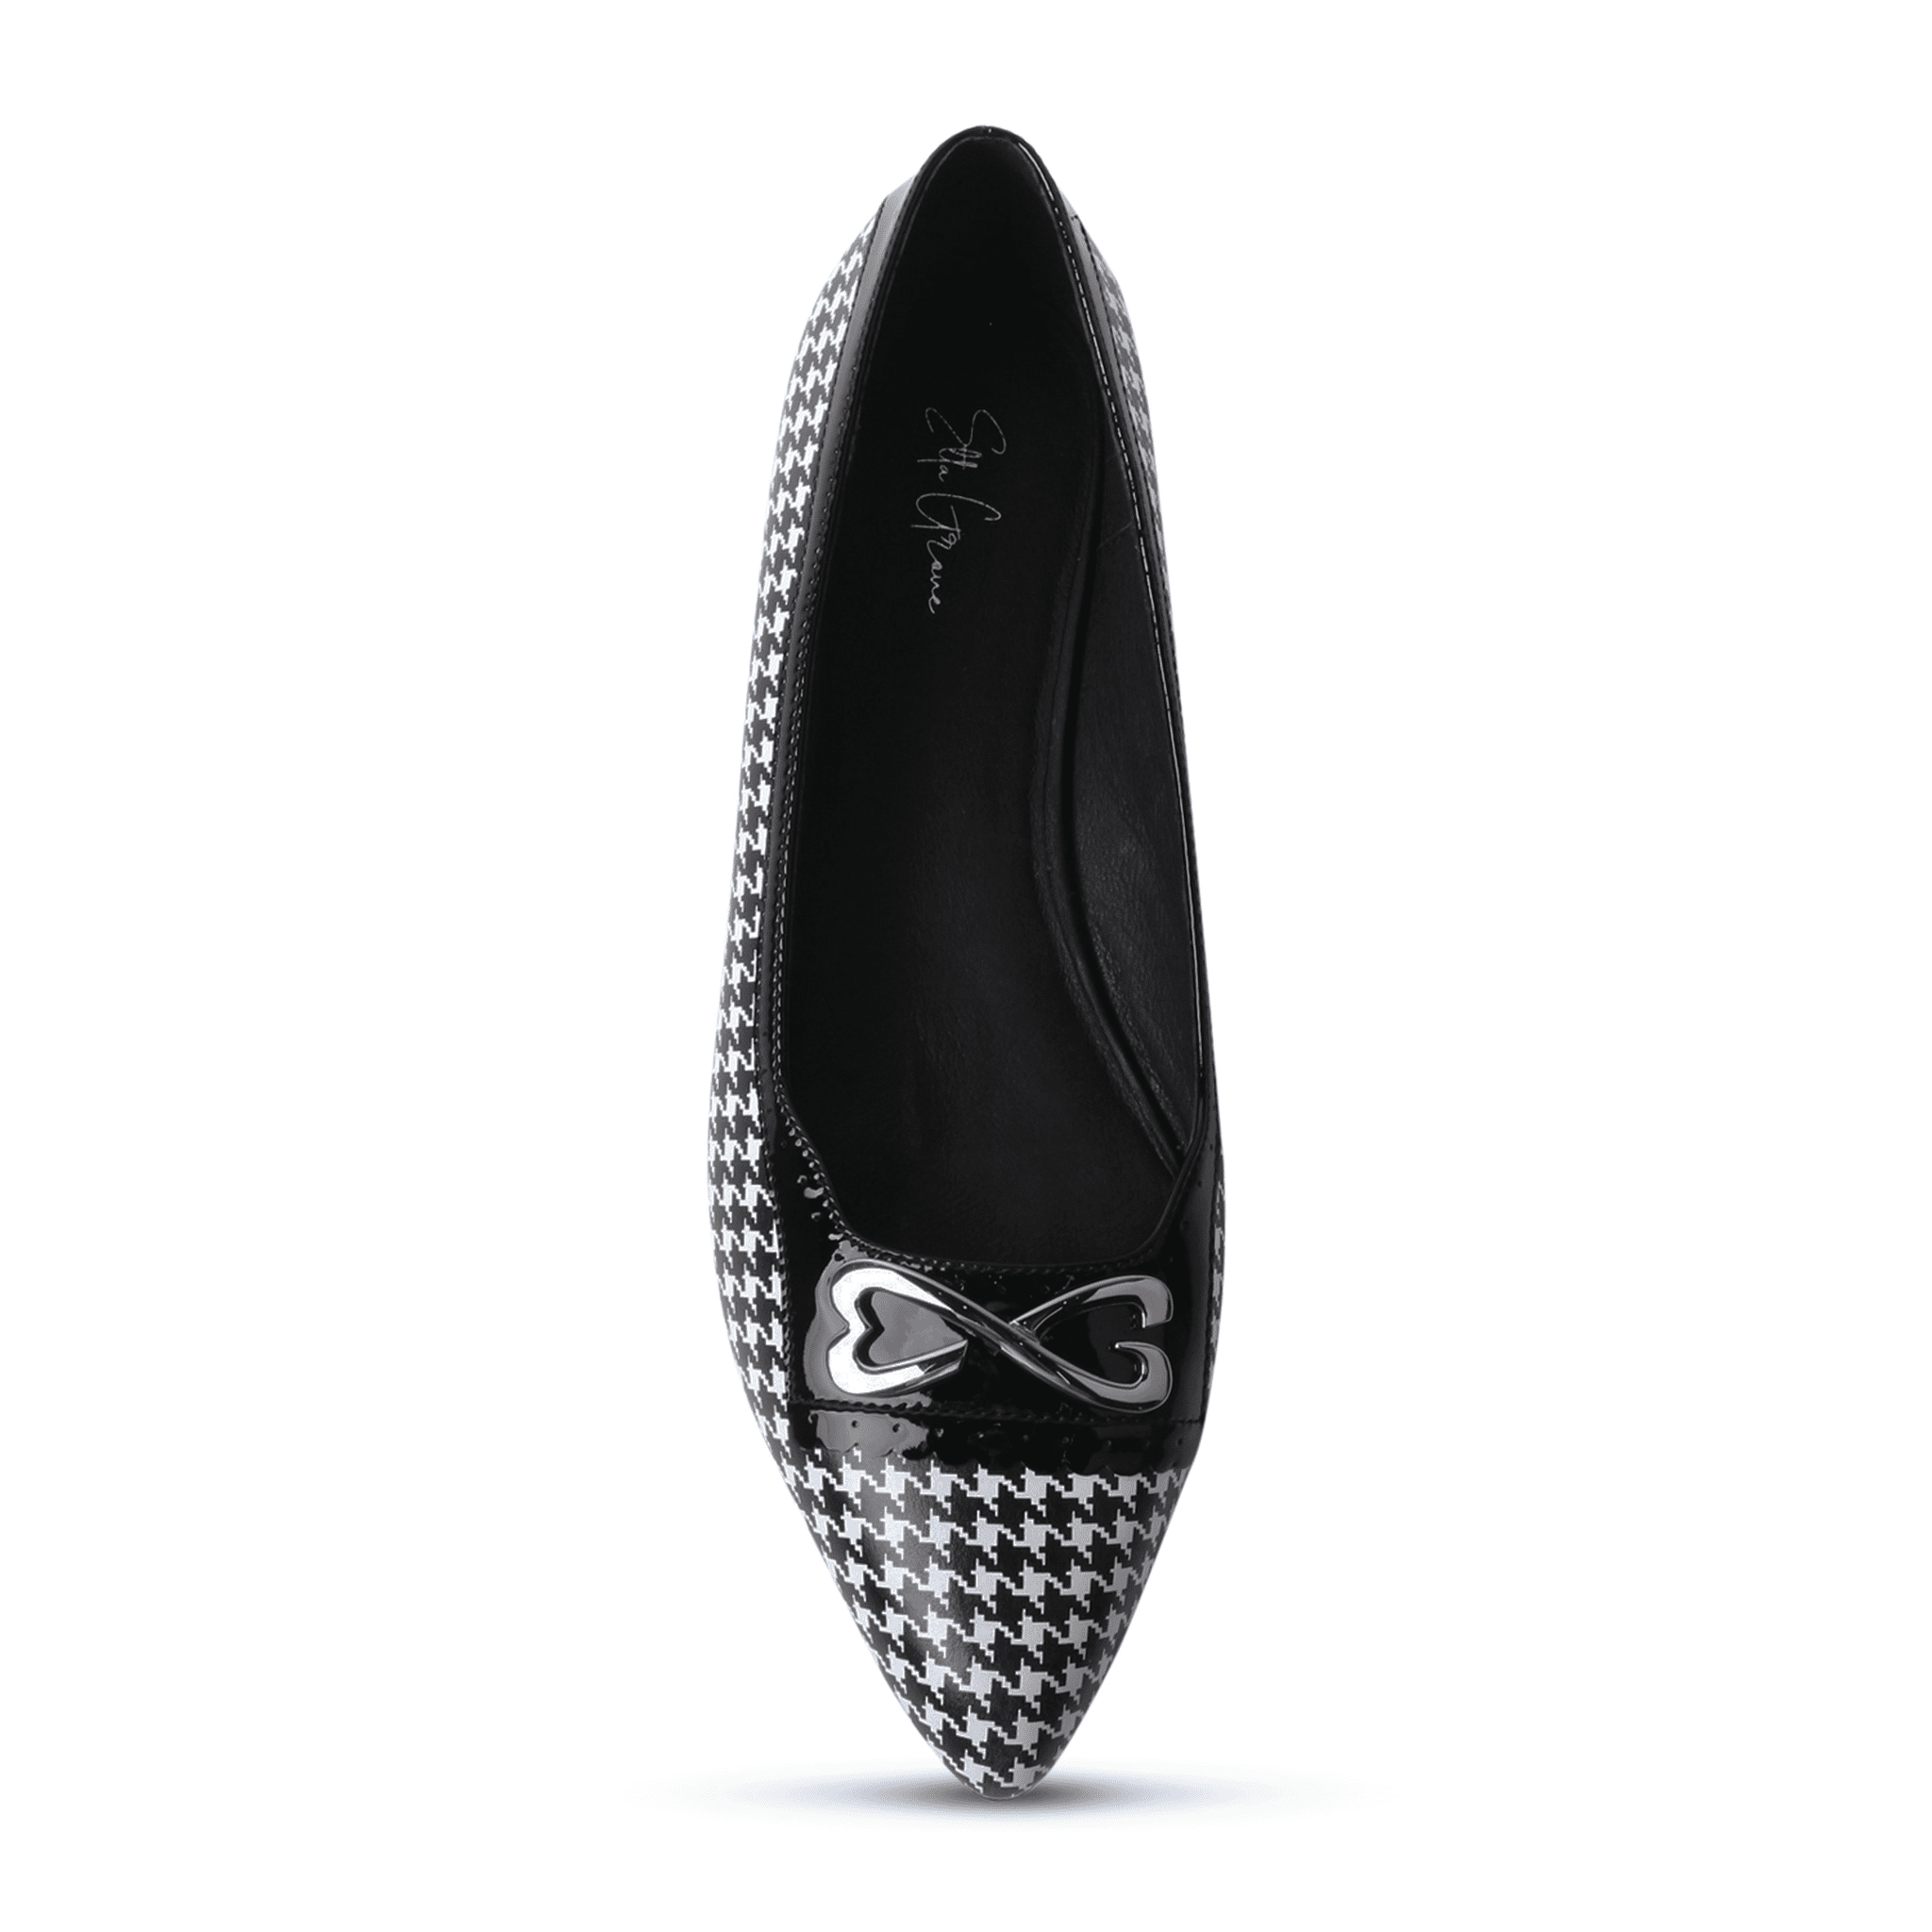 houndstooth calf leather ballerina flat large sizes